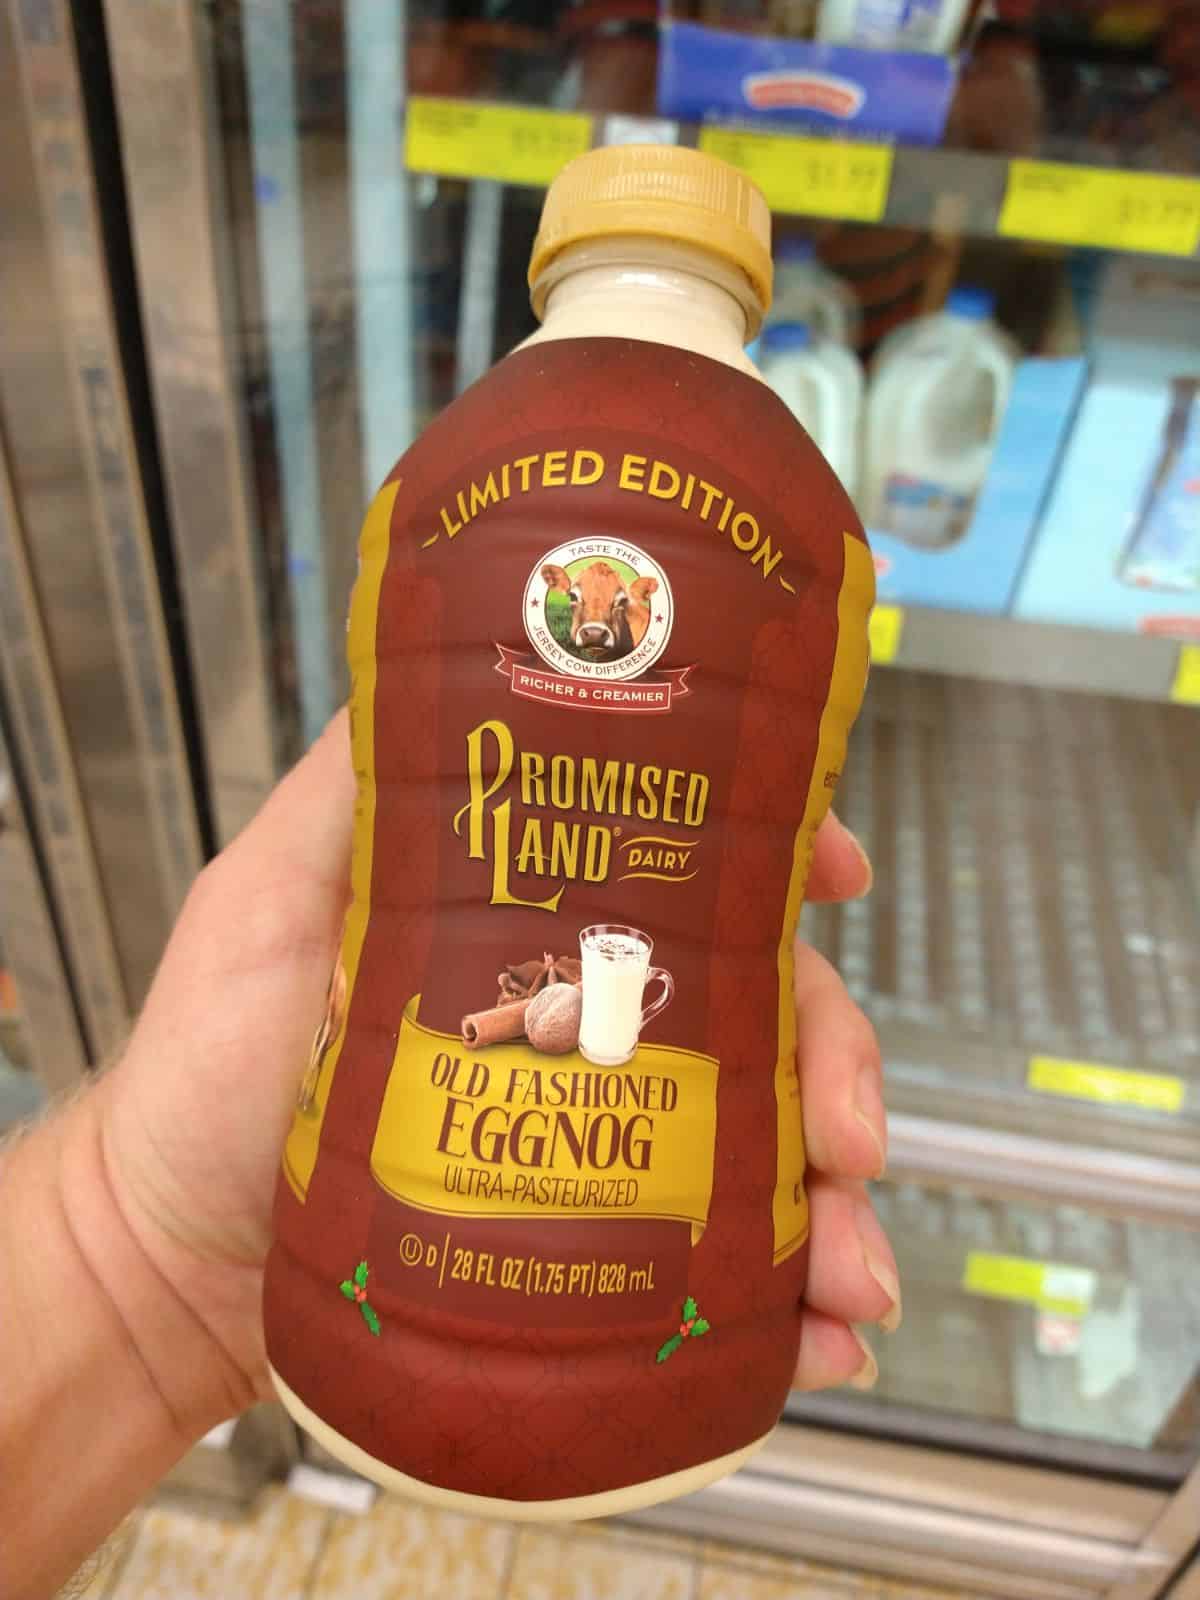 Holding a brown container of Promised Land Old Fashioned Egg Nog.